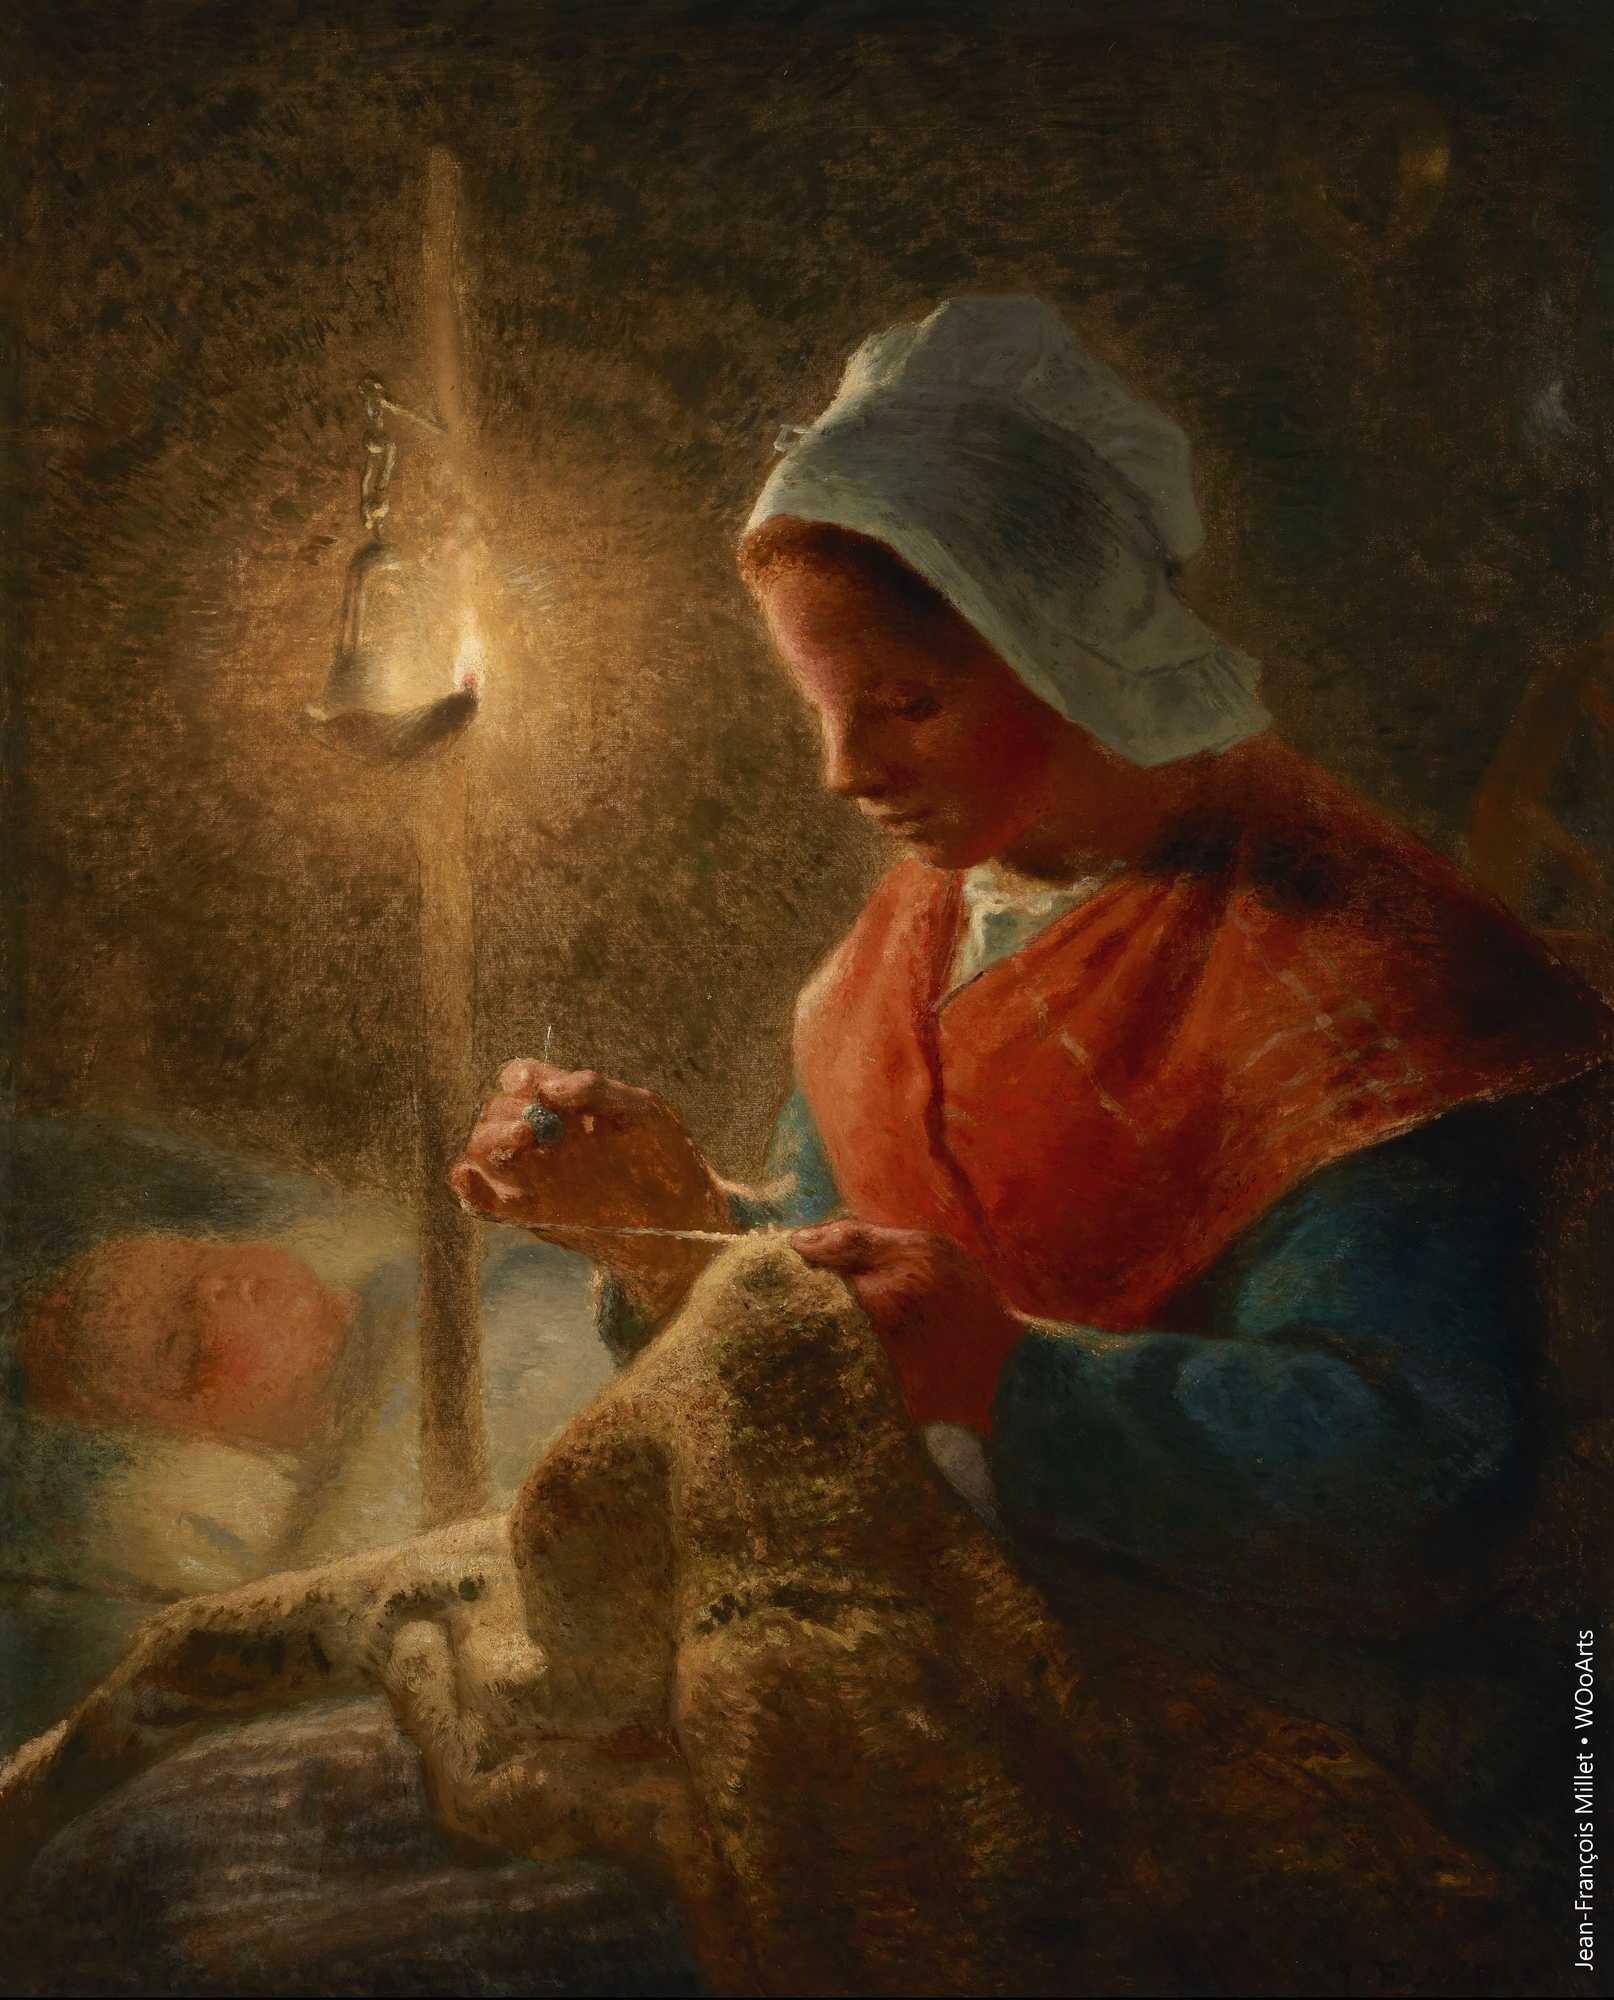 Painting by Jean-François Millet